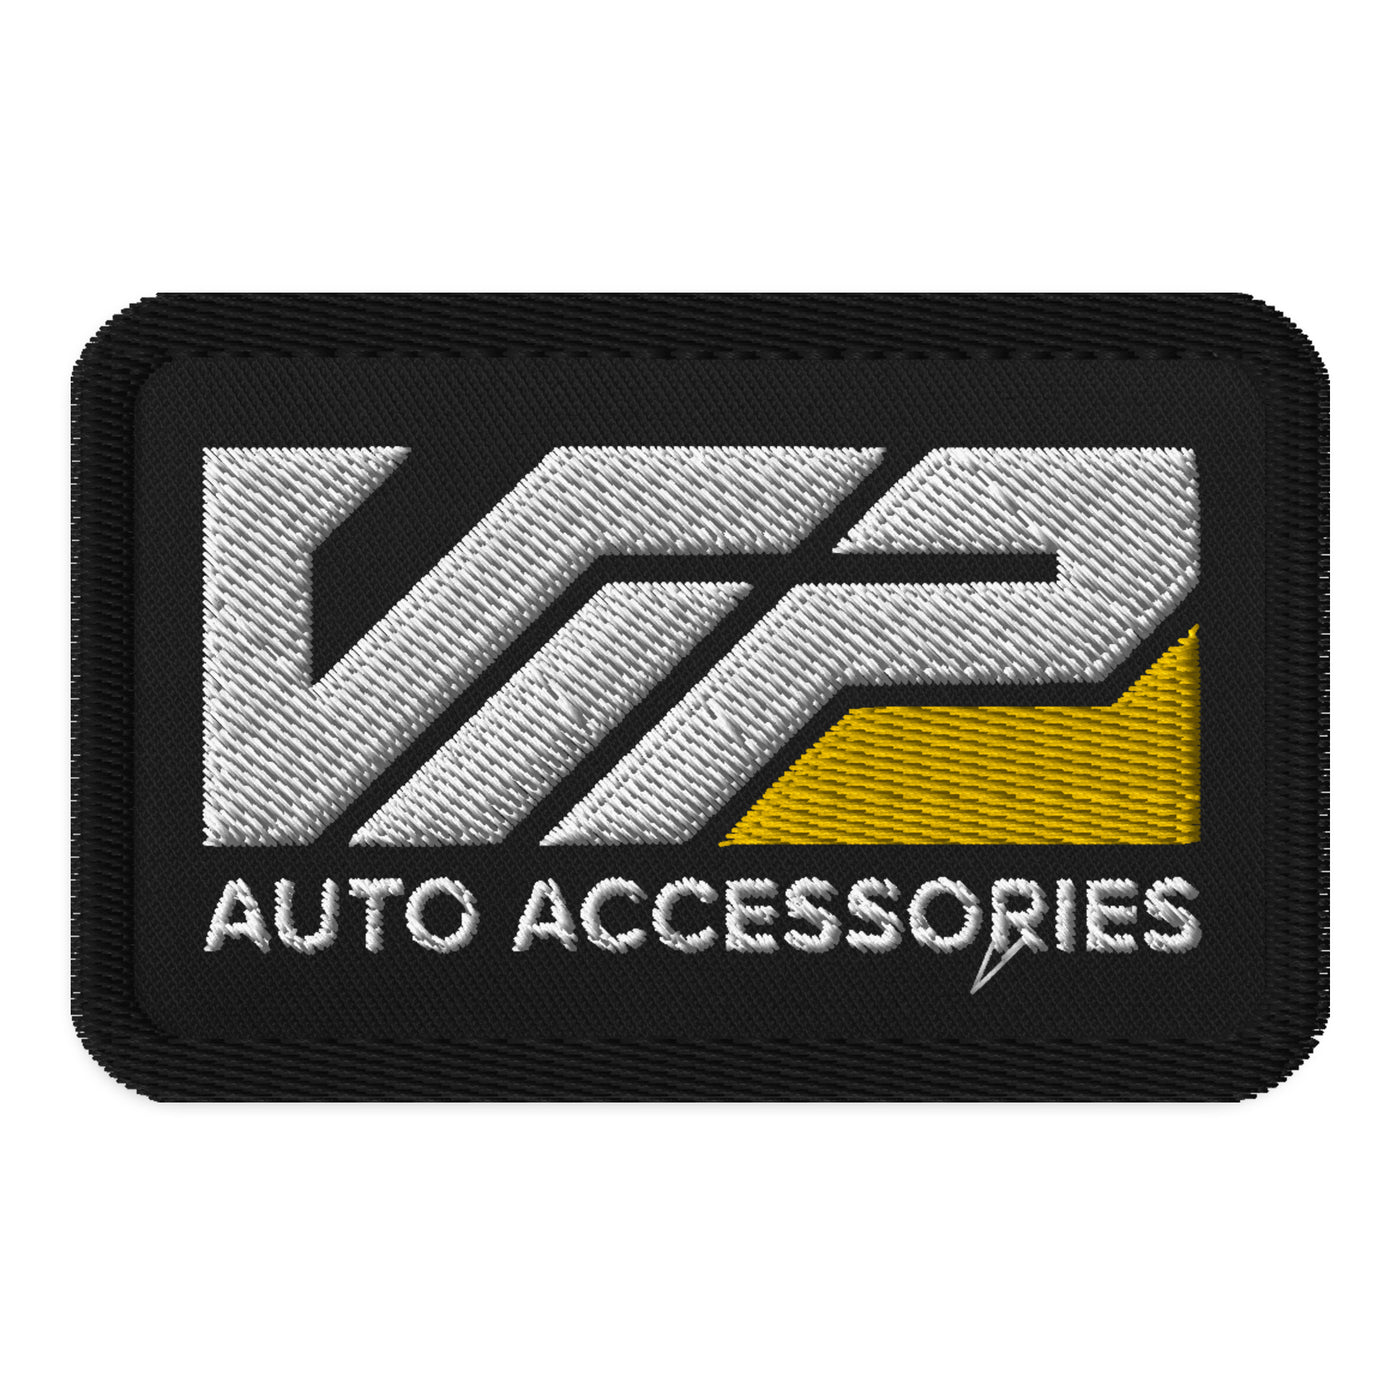 Black Auto Accessories Embroidered Patch